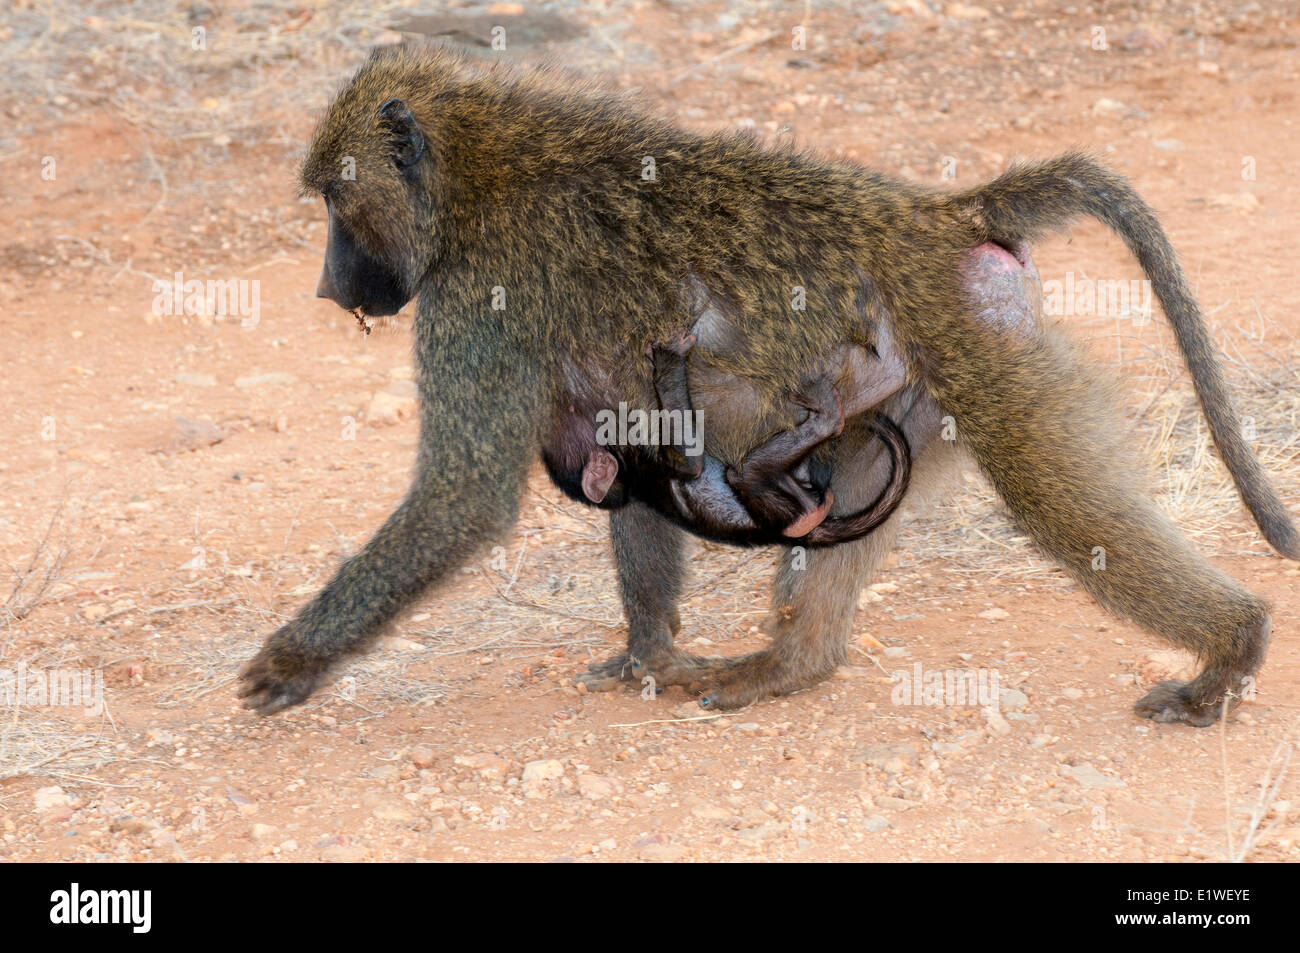 Olive baboon (Papio anubis) mother foraging for seeds while her newborn hangs below her belly, Kenya, East Africa Stock Photo